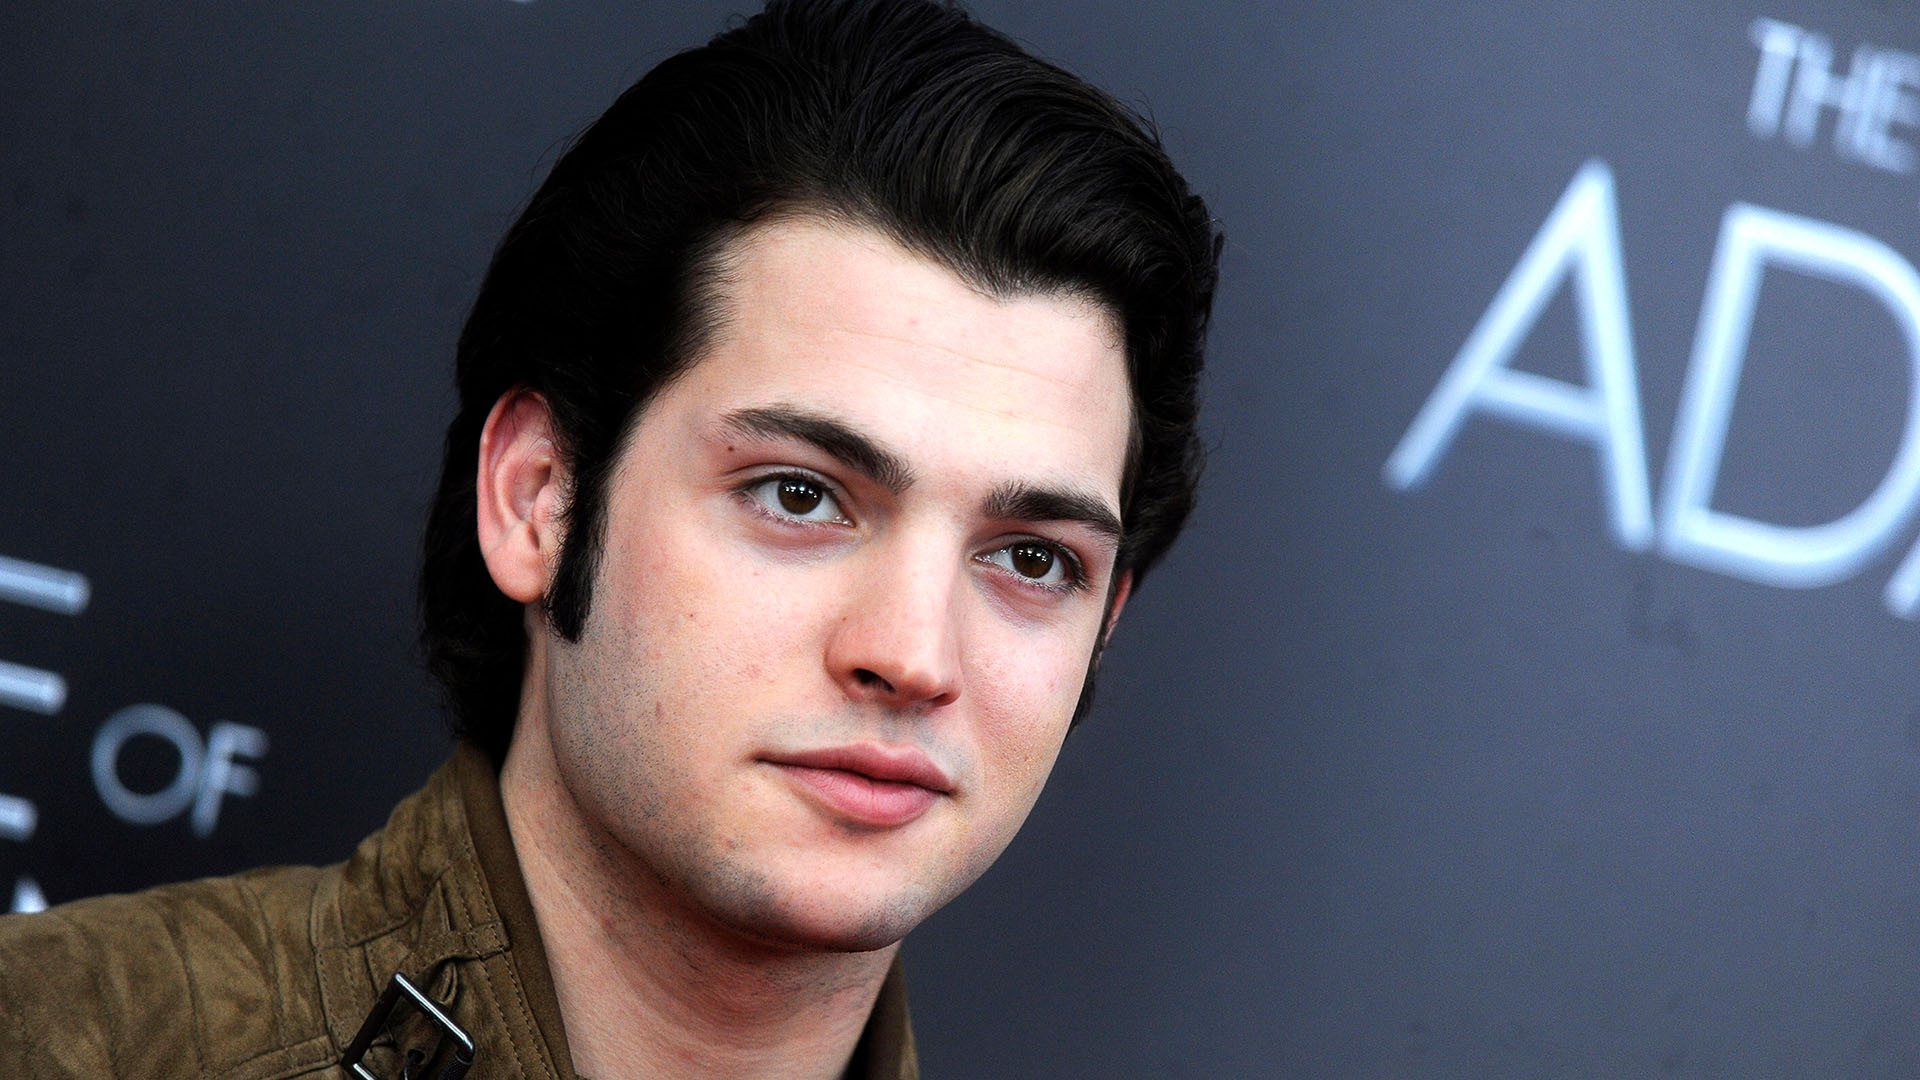 Harry Brant murió de una sobredosis accidental (The Grosby Group)